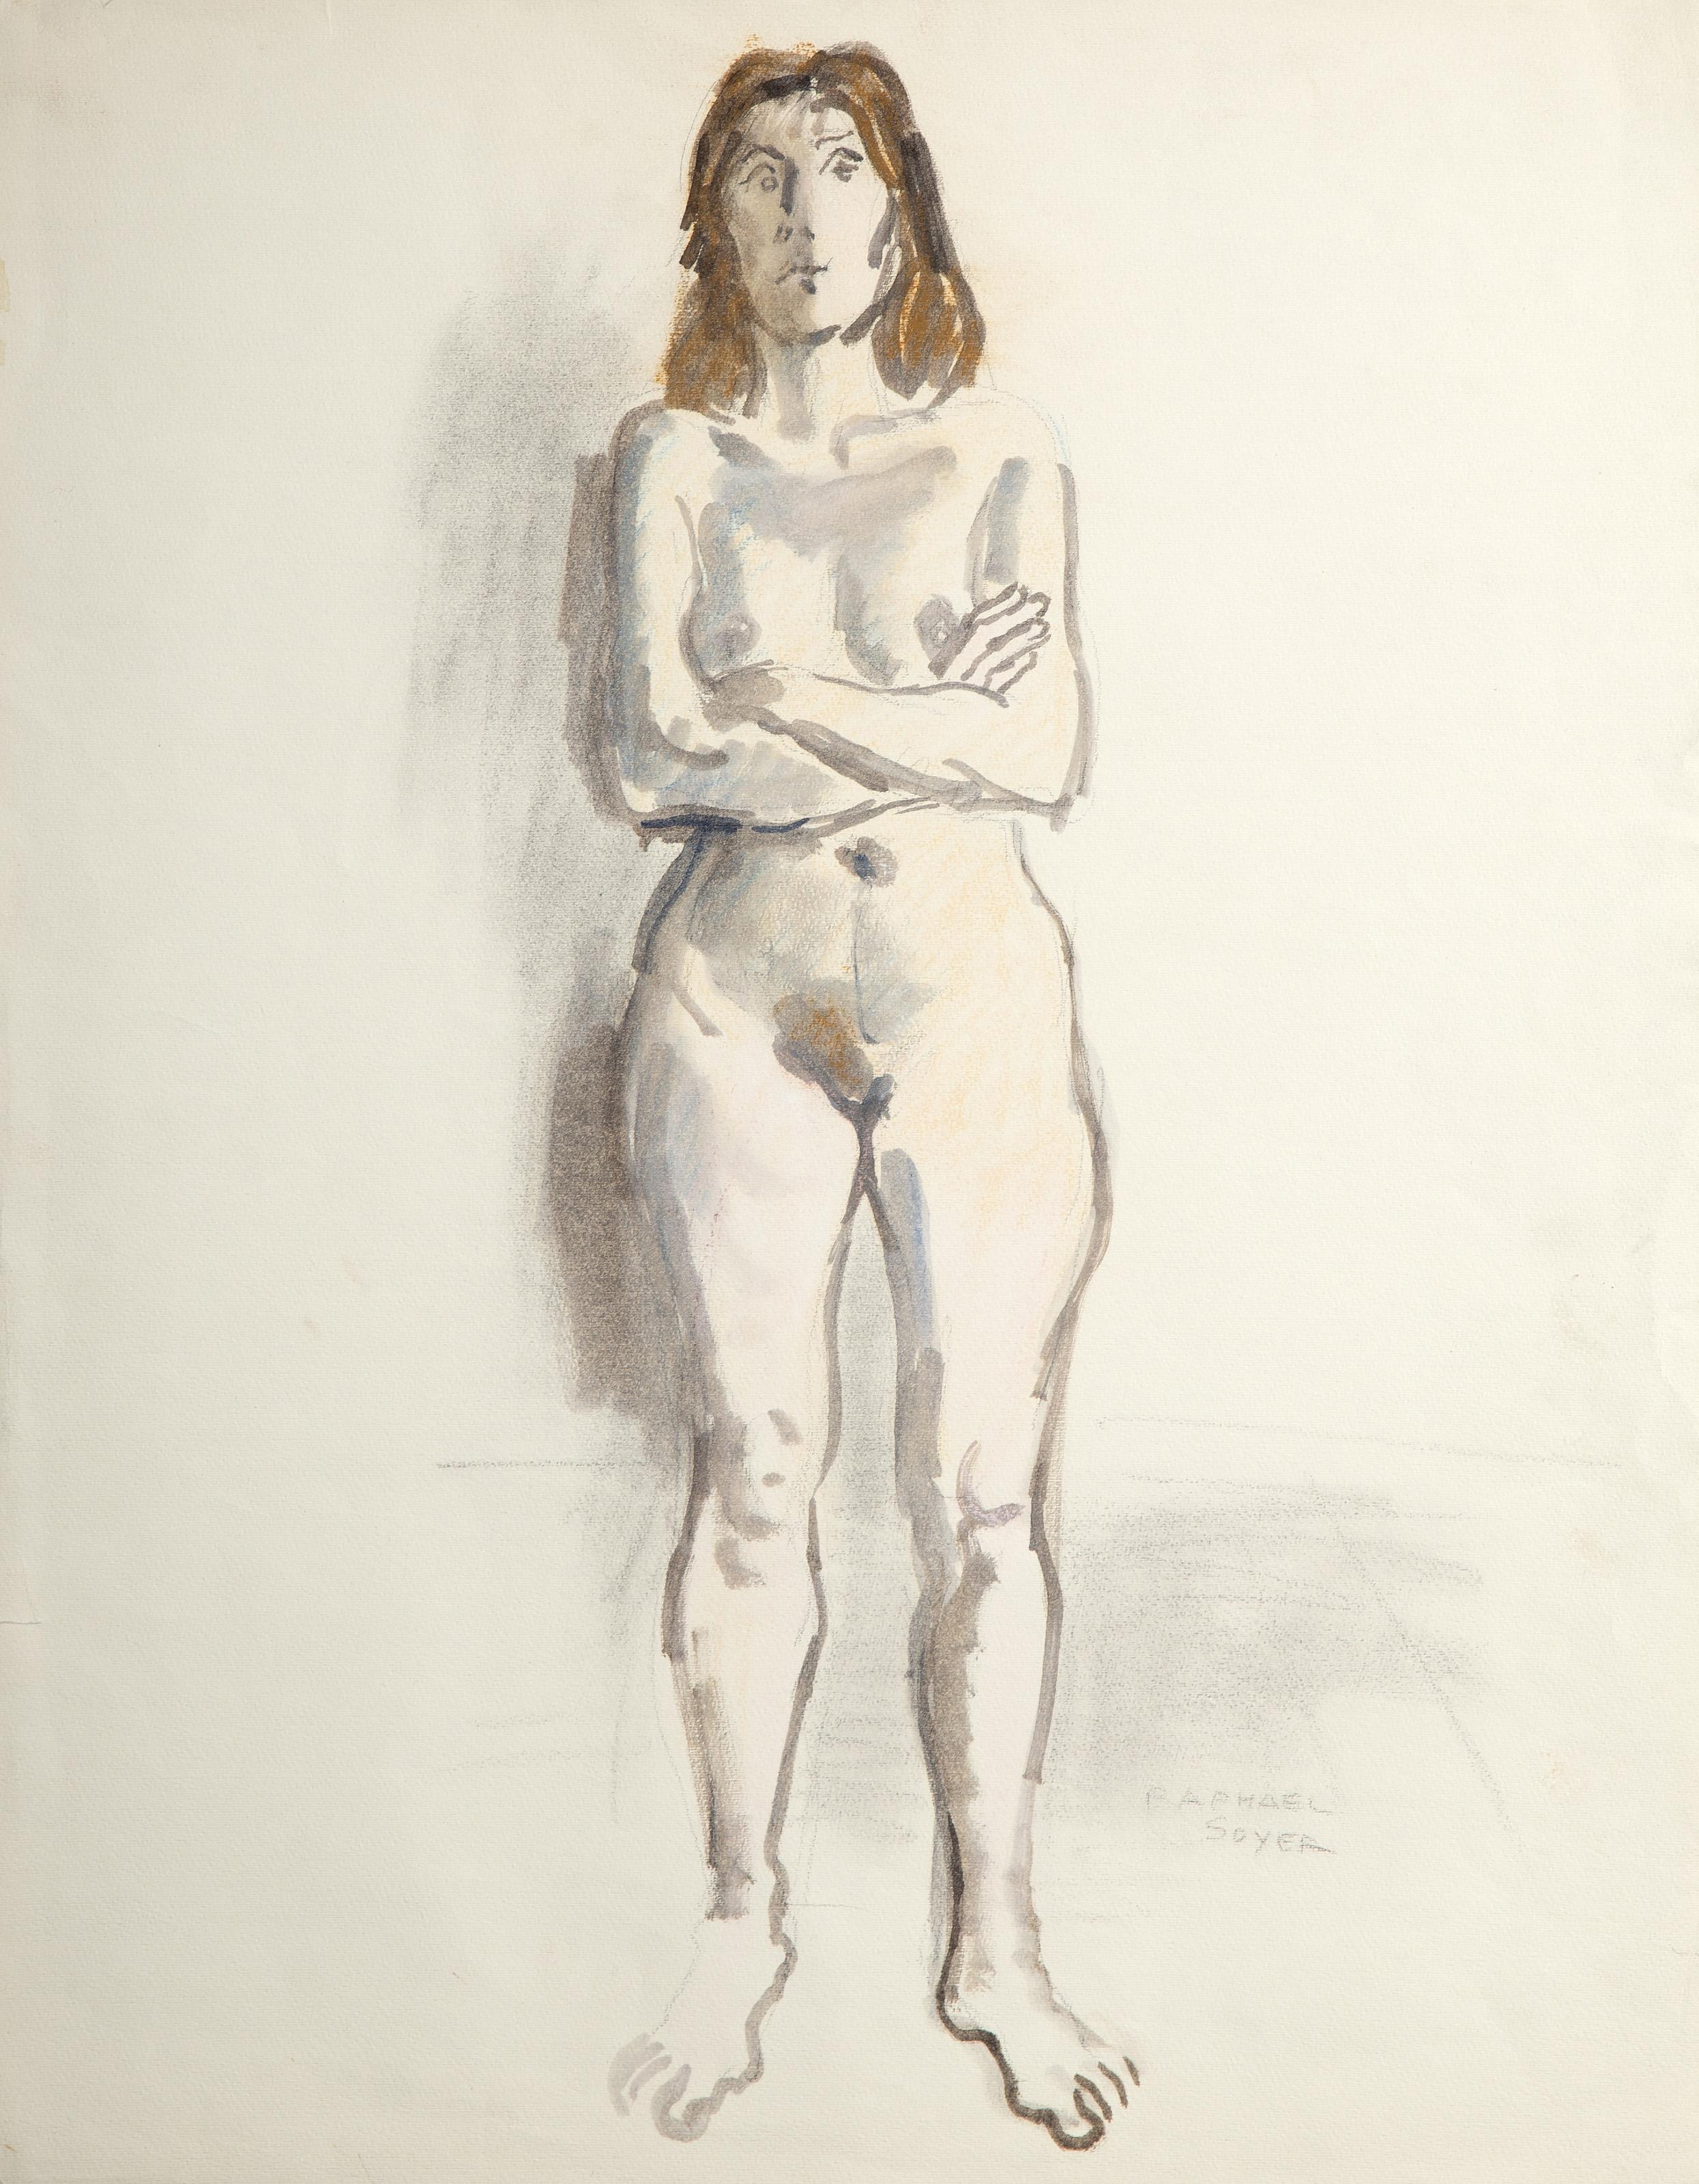 Raphael Soyer, Russian/American (1899 - 1987) -  Nude Figure. Medium: Watercolor and Graphite on Paper, signed in pencil, Size: 25 x 19.75 in. (63.5 x 50.17 cm) 